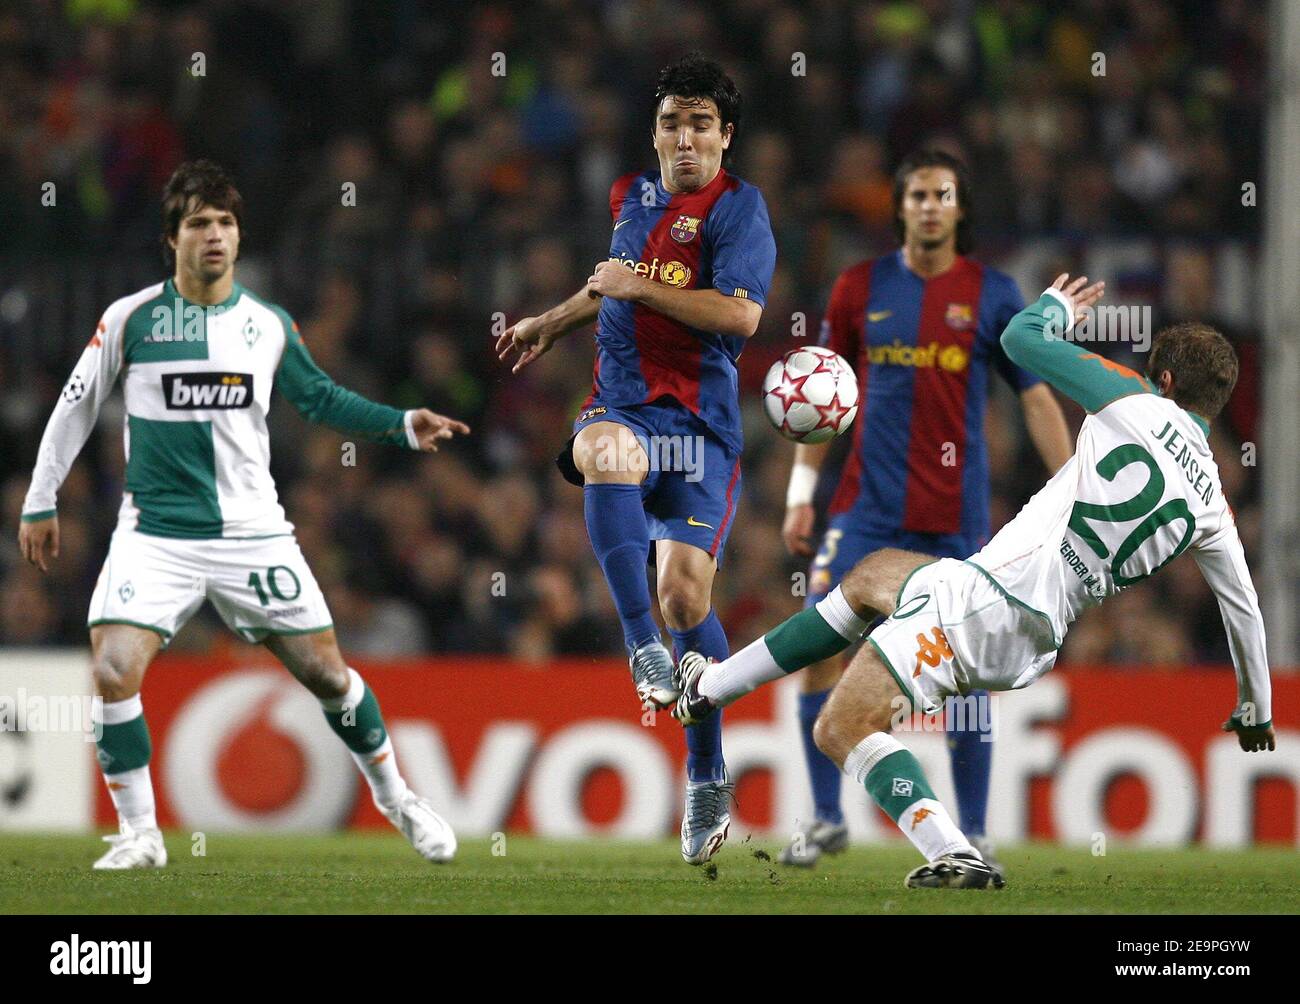 Barcelona's Deco and Werder Bremen's Daniel Jensen battle for the ball during the UEFA Champions League, Group A, FC Barcelona vs Werder Bremen at Camp Nou, in Barcelona, Spain, on December 5, 2006. FC Barcelona won 2-0. Photo by Christian Liewig/ABACAPRESS.COM Stock Photo